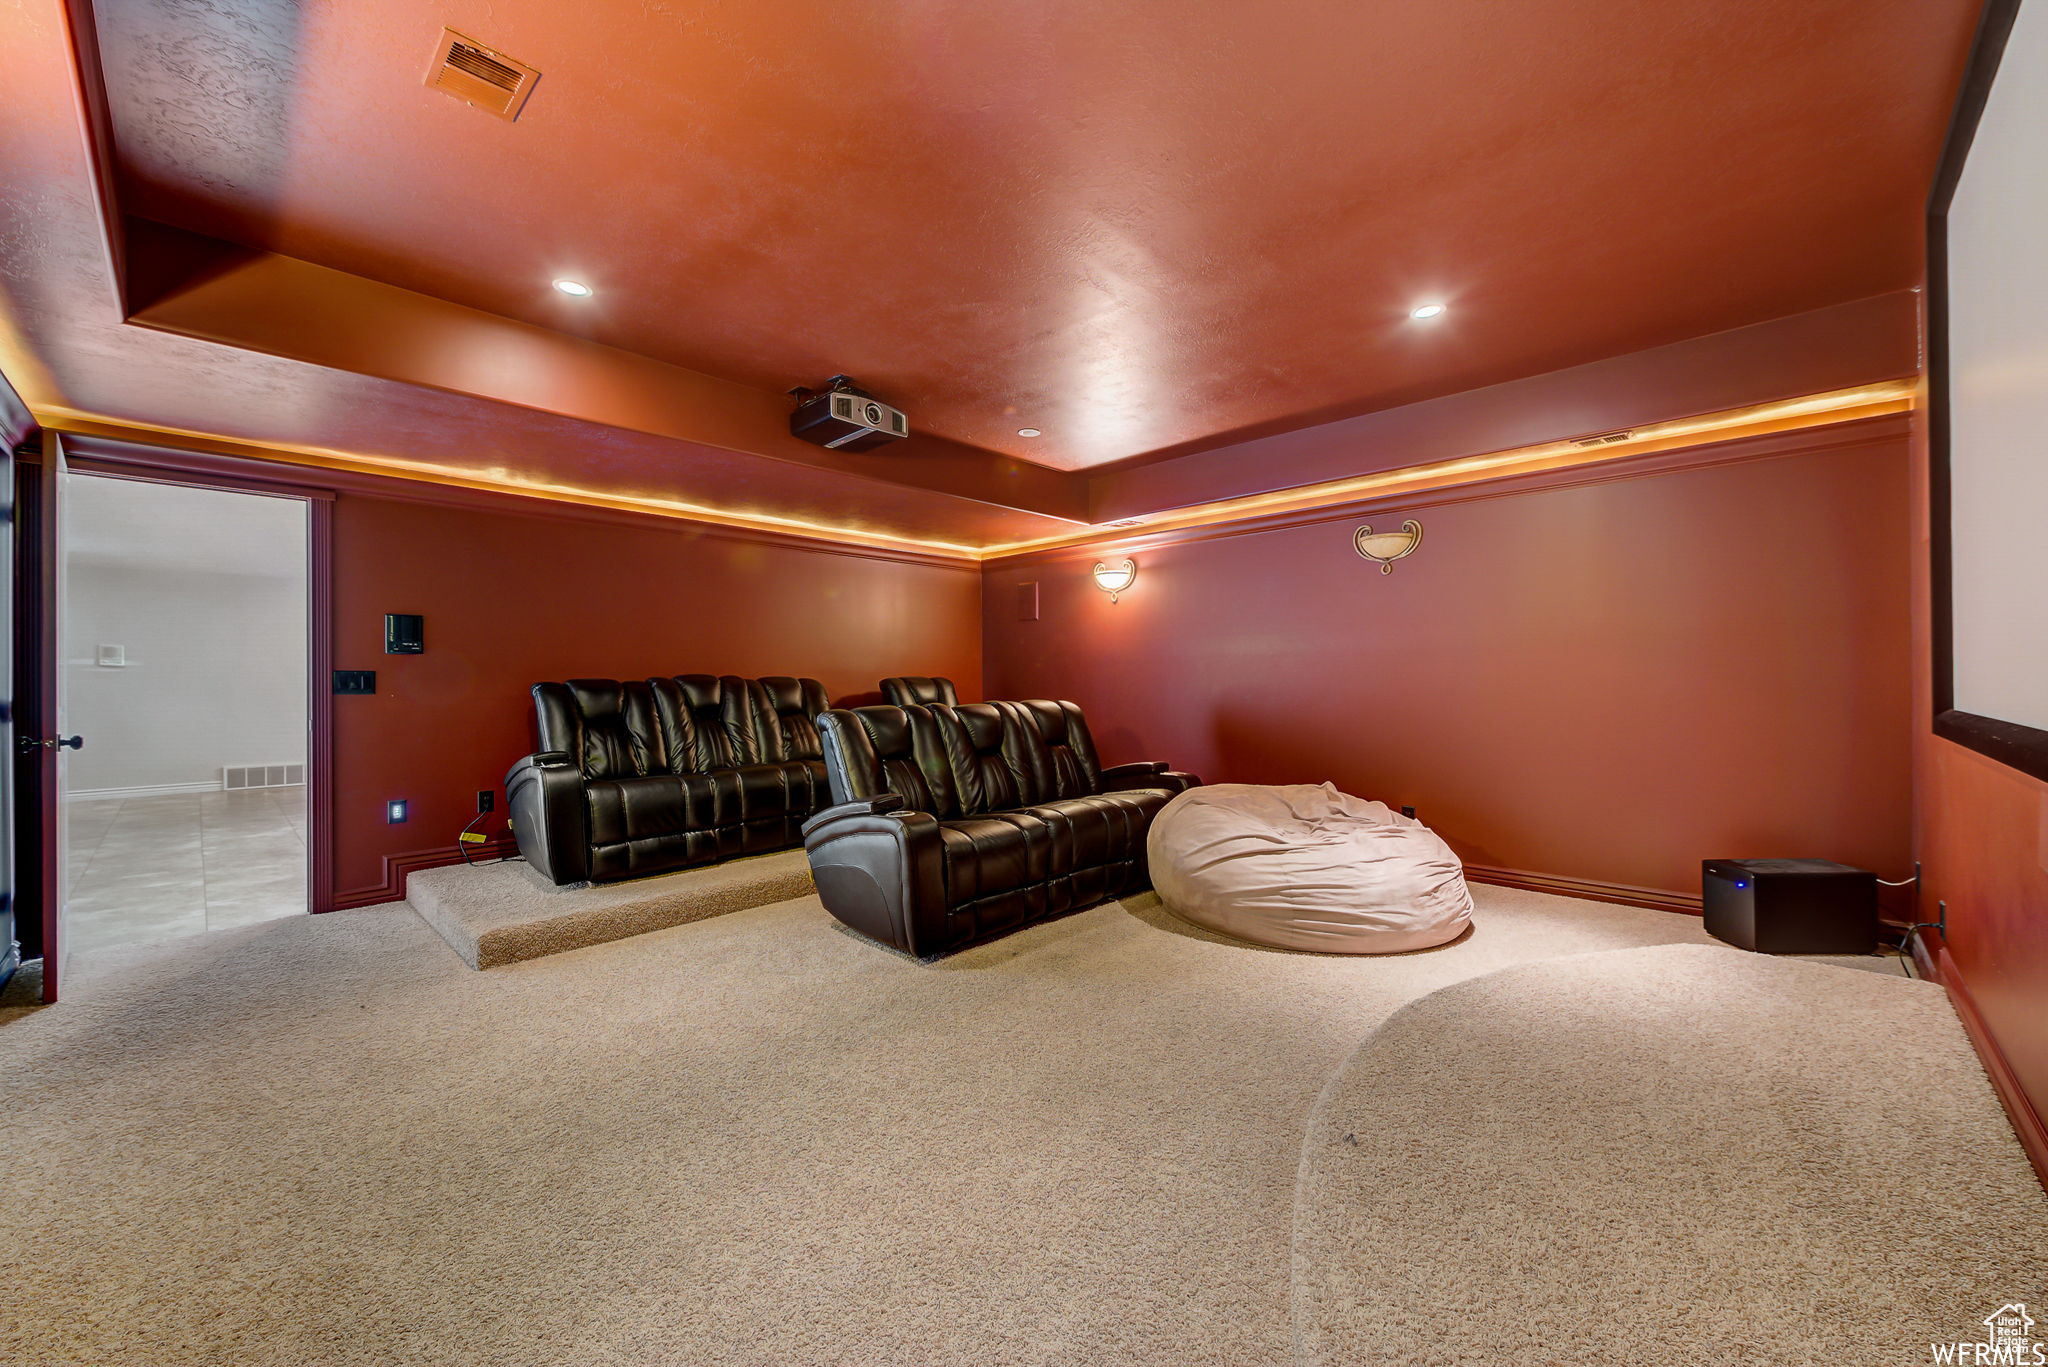 Carpeted cinema featuring a raised ceiling